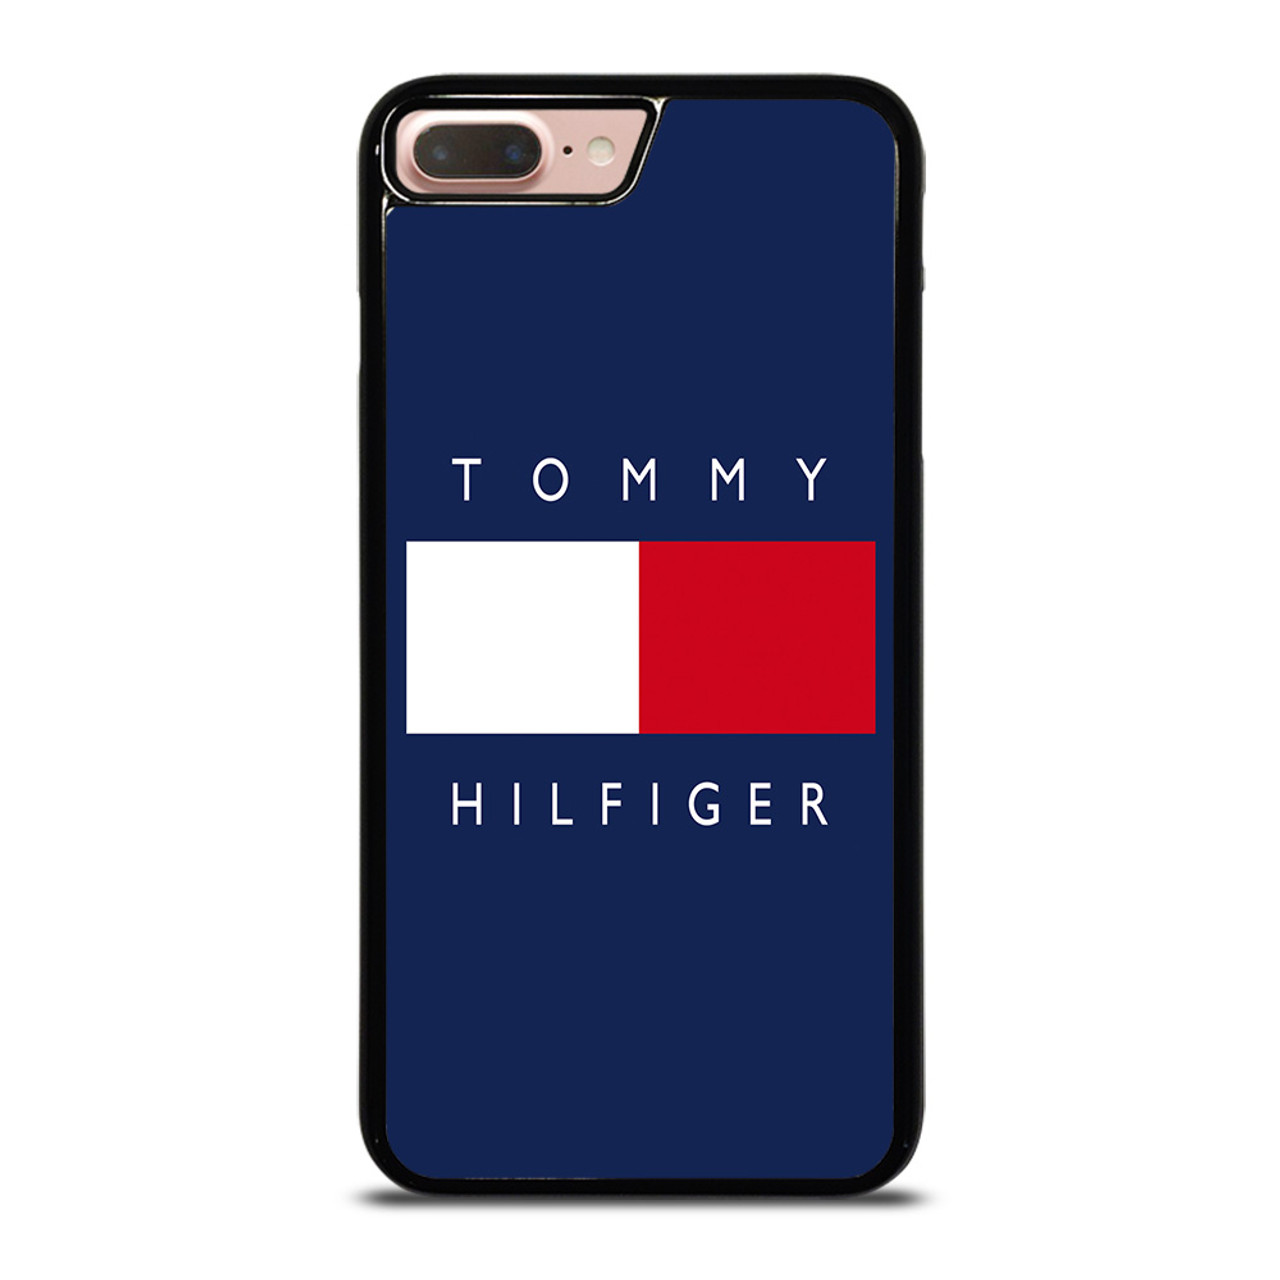 Perceptie Cater timer TOMMY HILFIGER iPhone 8 Plus Case Cover